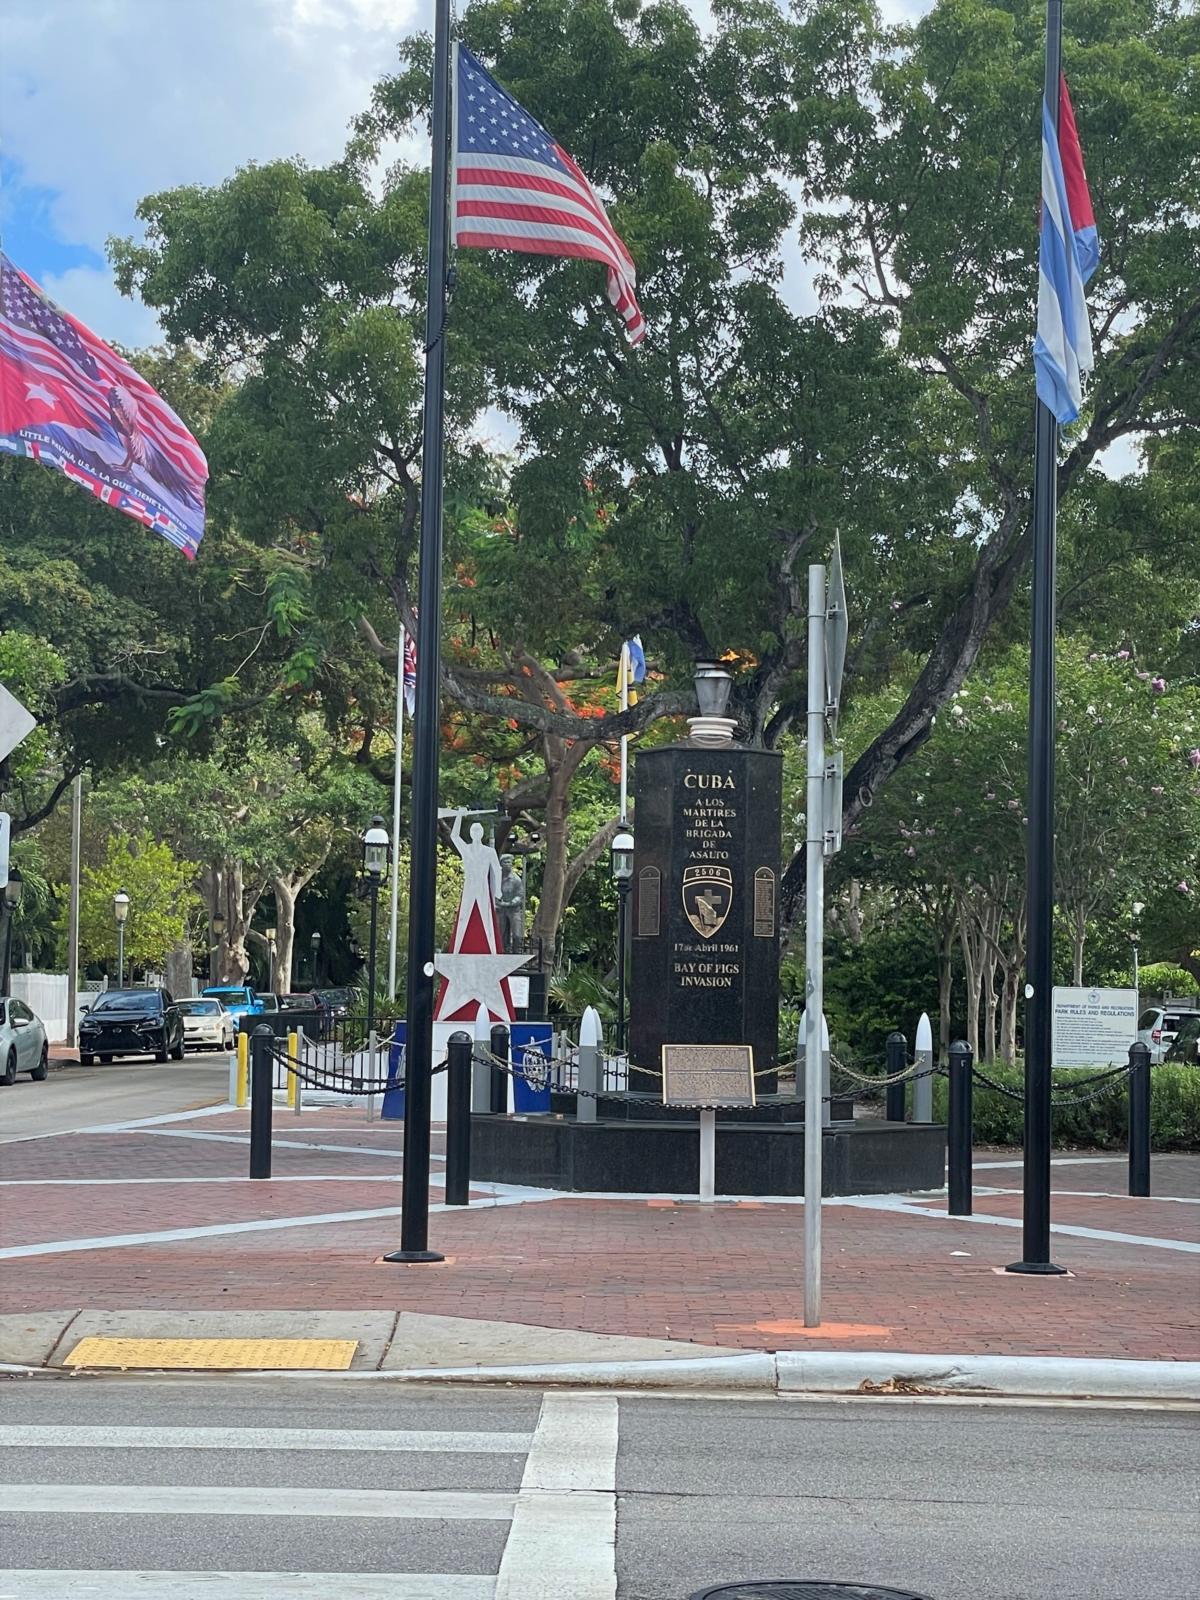 The Bay of Pigs Monument in Little Havana, Miami. (Alexander Liao)